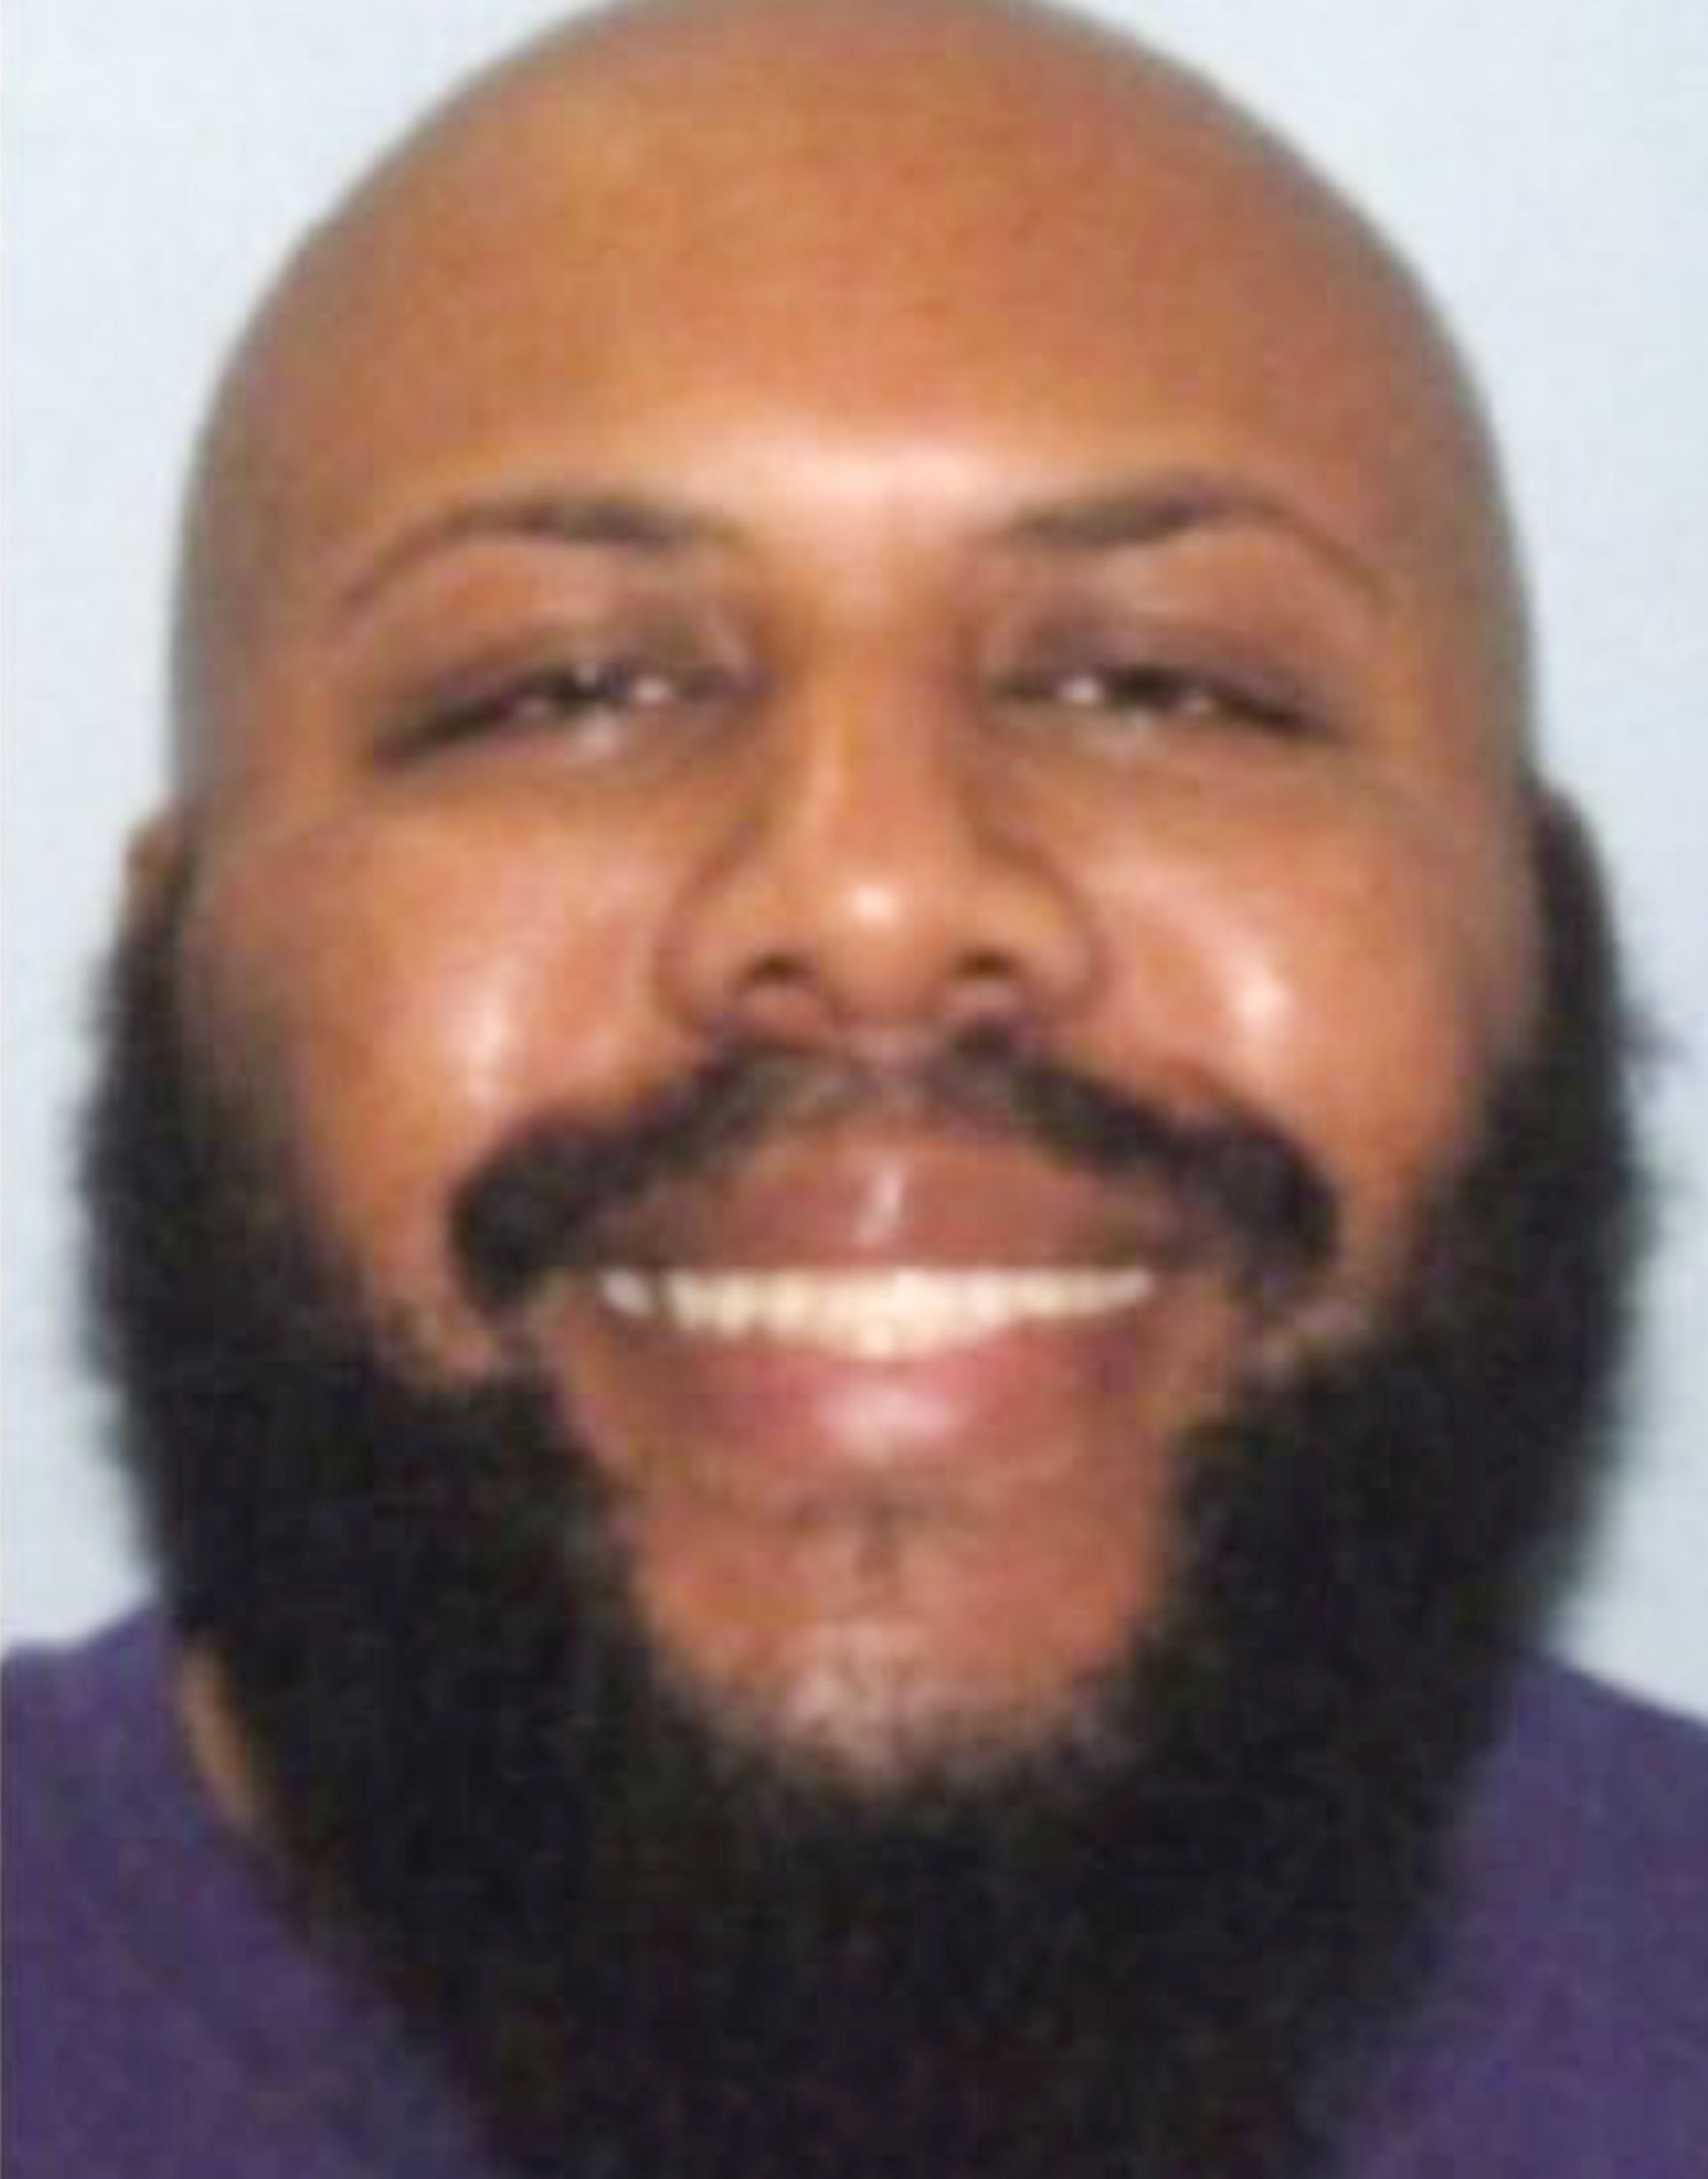 epa05911772 A handout photo made available by the Cleveland Police Department on 16 April 2017 reportedly shows Steve Stephens who is wanted for the shooting of an elderly man that was broadcast live on Facebook in Cleveland, Ohio, USA, 16 April 2017. According to police Stephens claims to have committed multiple homicides but that claim has not been verified.  EPA/CLEVELAND POLICE DEPARTMENT / HANDOUT HANDOUT BEST QUALITY AVAILABLE HANDOUT EDITORIAL USE ONLY/NO SALES